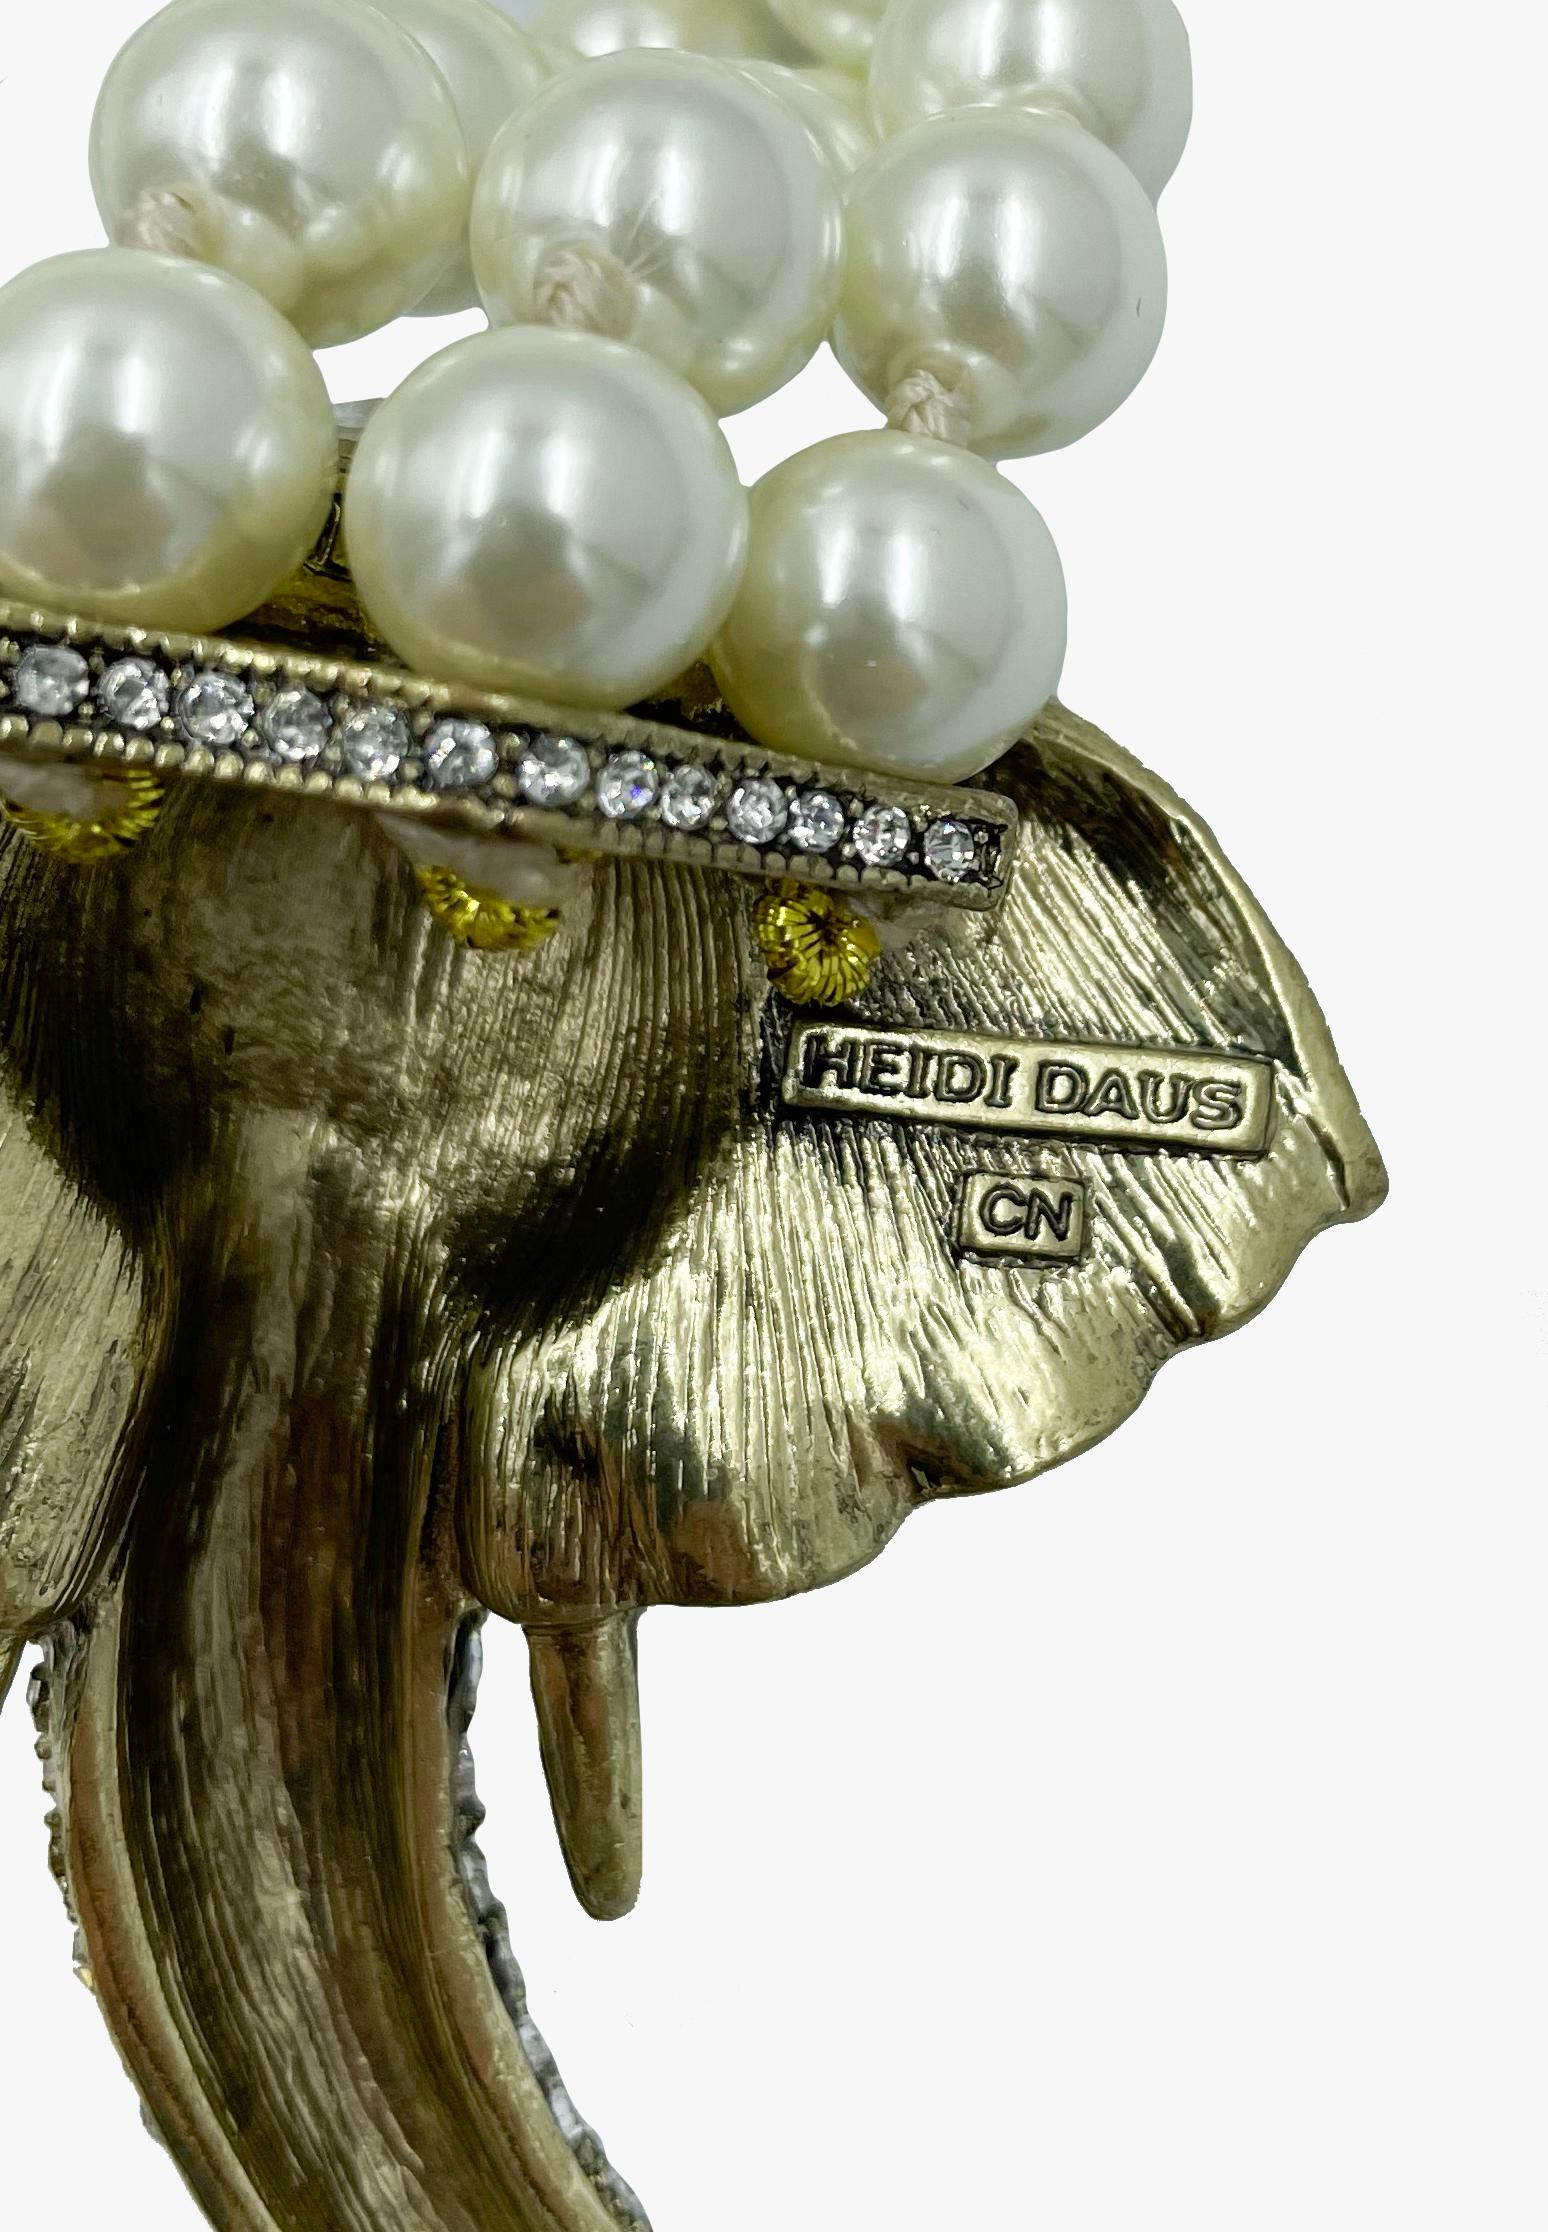 Gorgeous Heidi Daus faux pearl necklace embellished with an elephant head in strass . 

Signed. 

The length of the necklace is adjustable. You can wrap a string of pearls around the elephant as per your preference.

The total length of the necklace